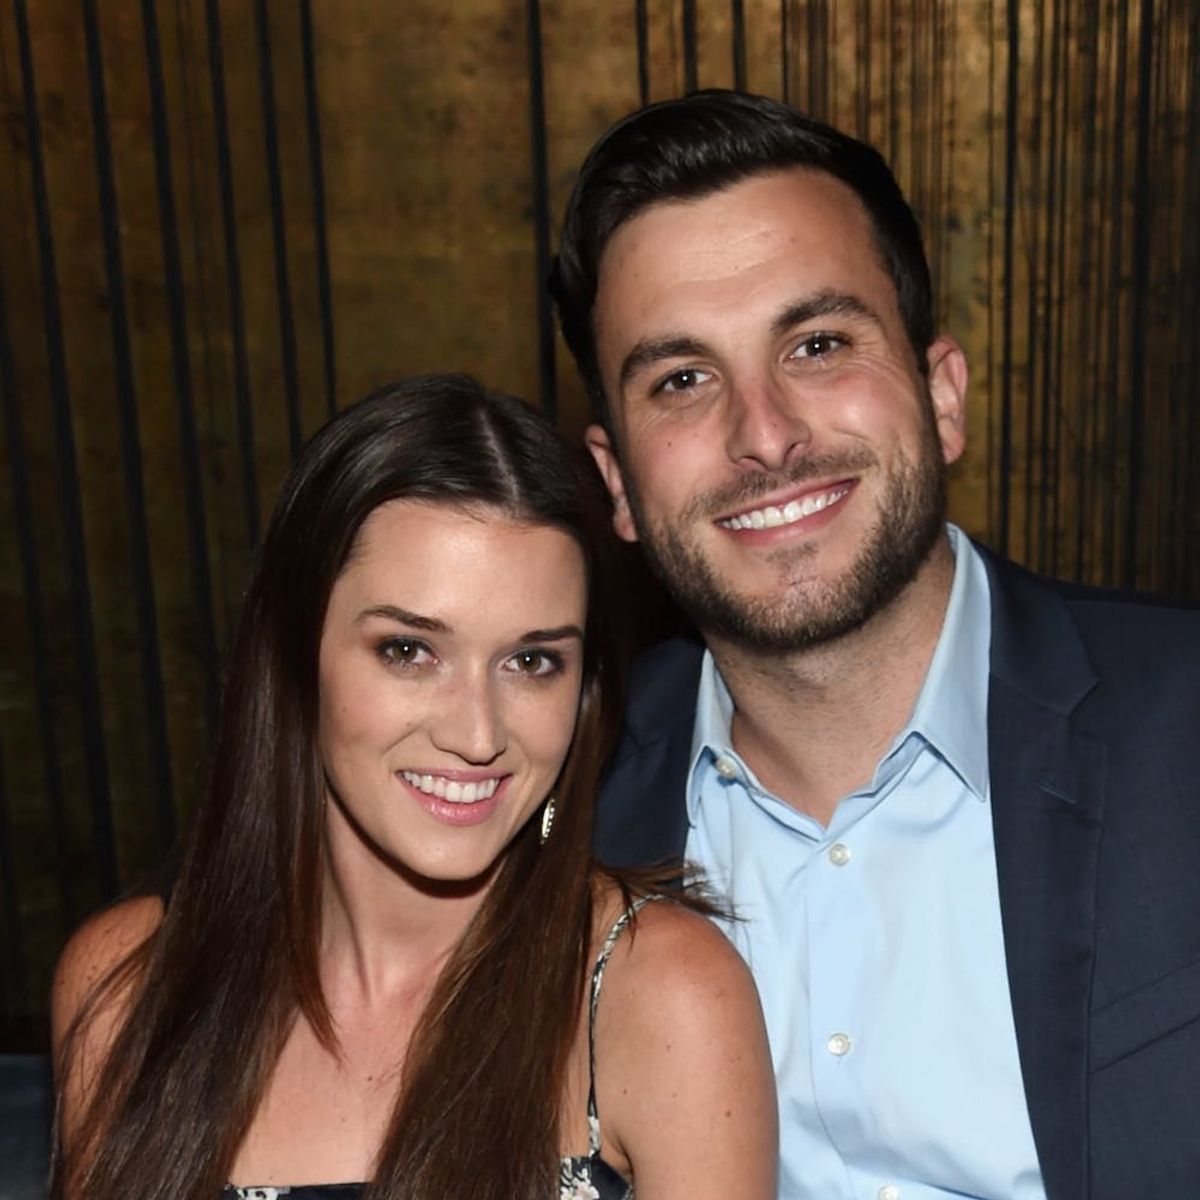 Bachelor in Paradise Stars Tanner Tolbert and Jade Roper Reveal They’re Expecting a Baby Girl